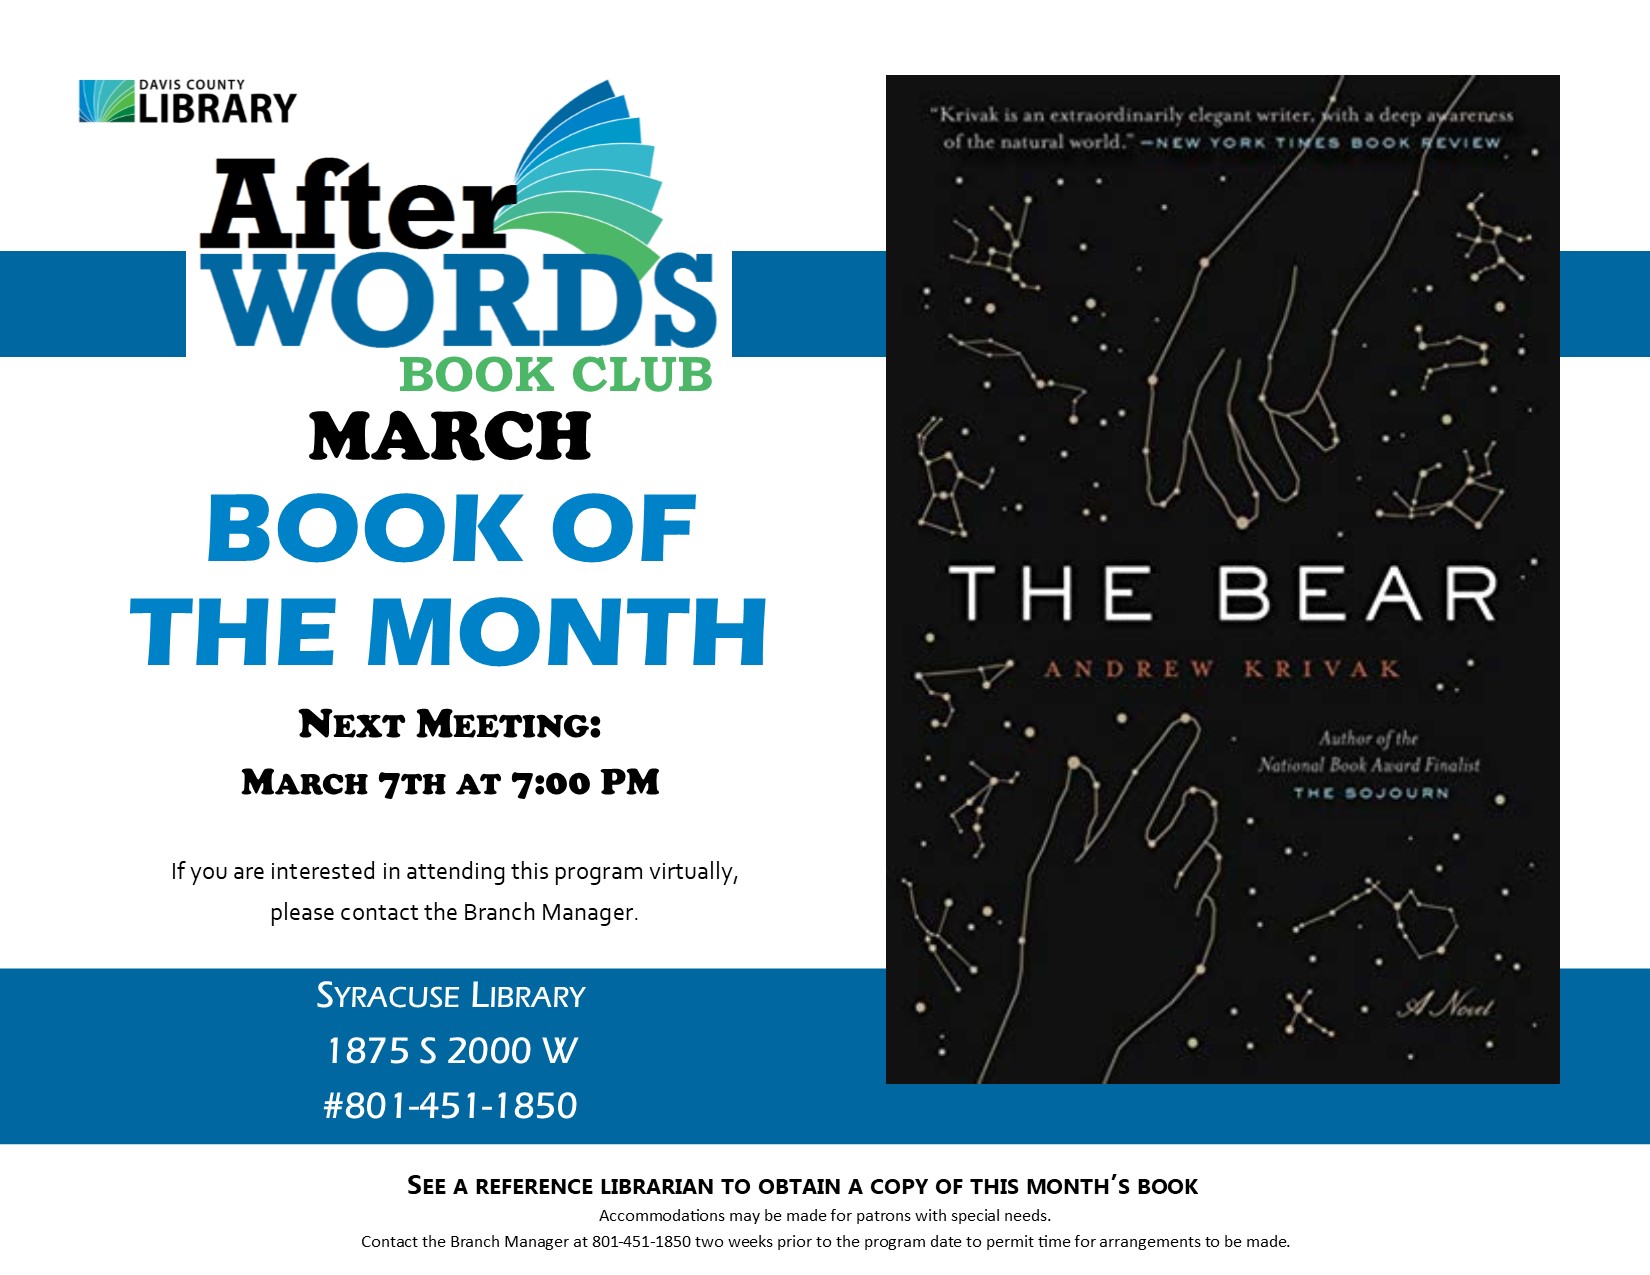 After Words Book Club @ 7pm The Bear by Andrew Krivak